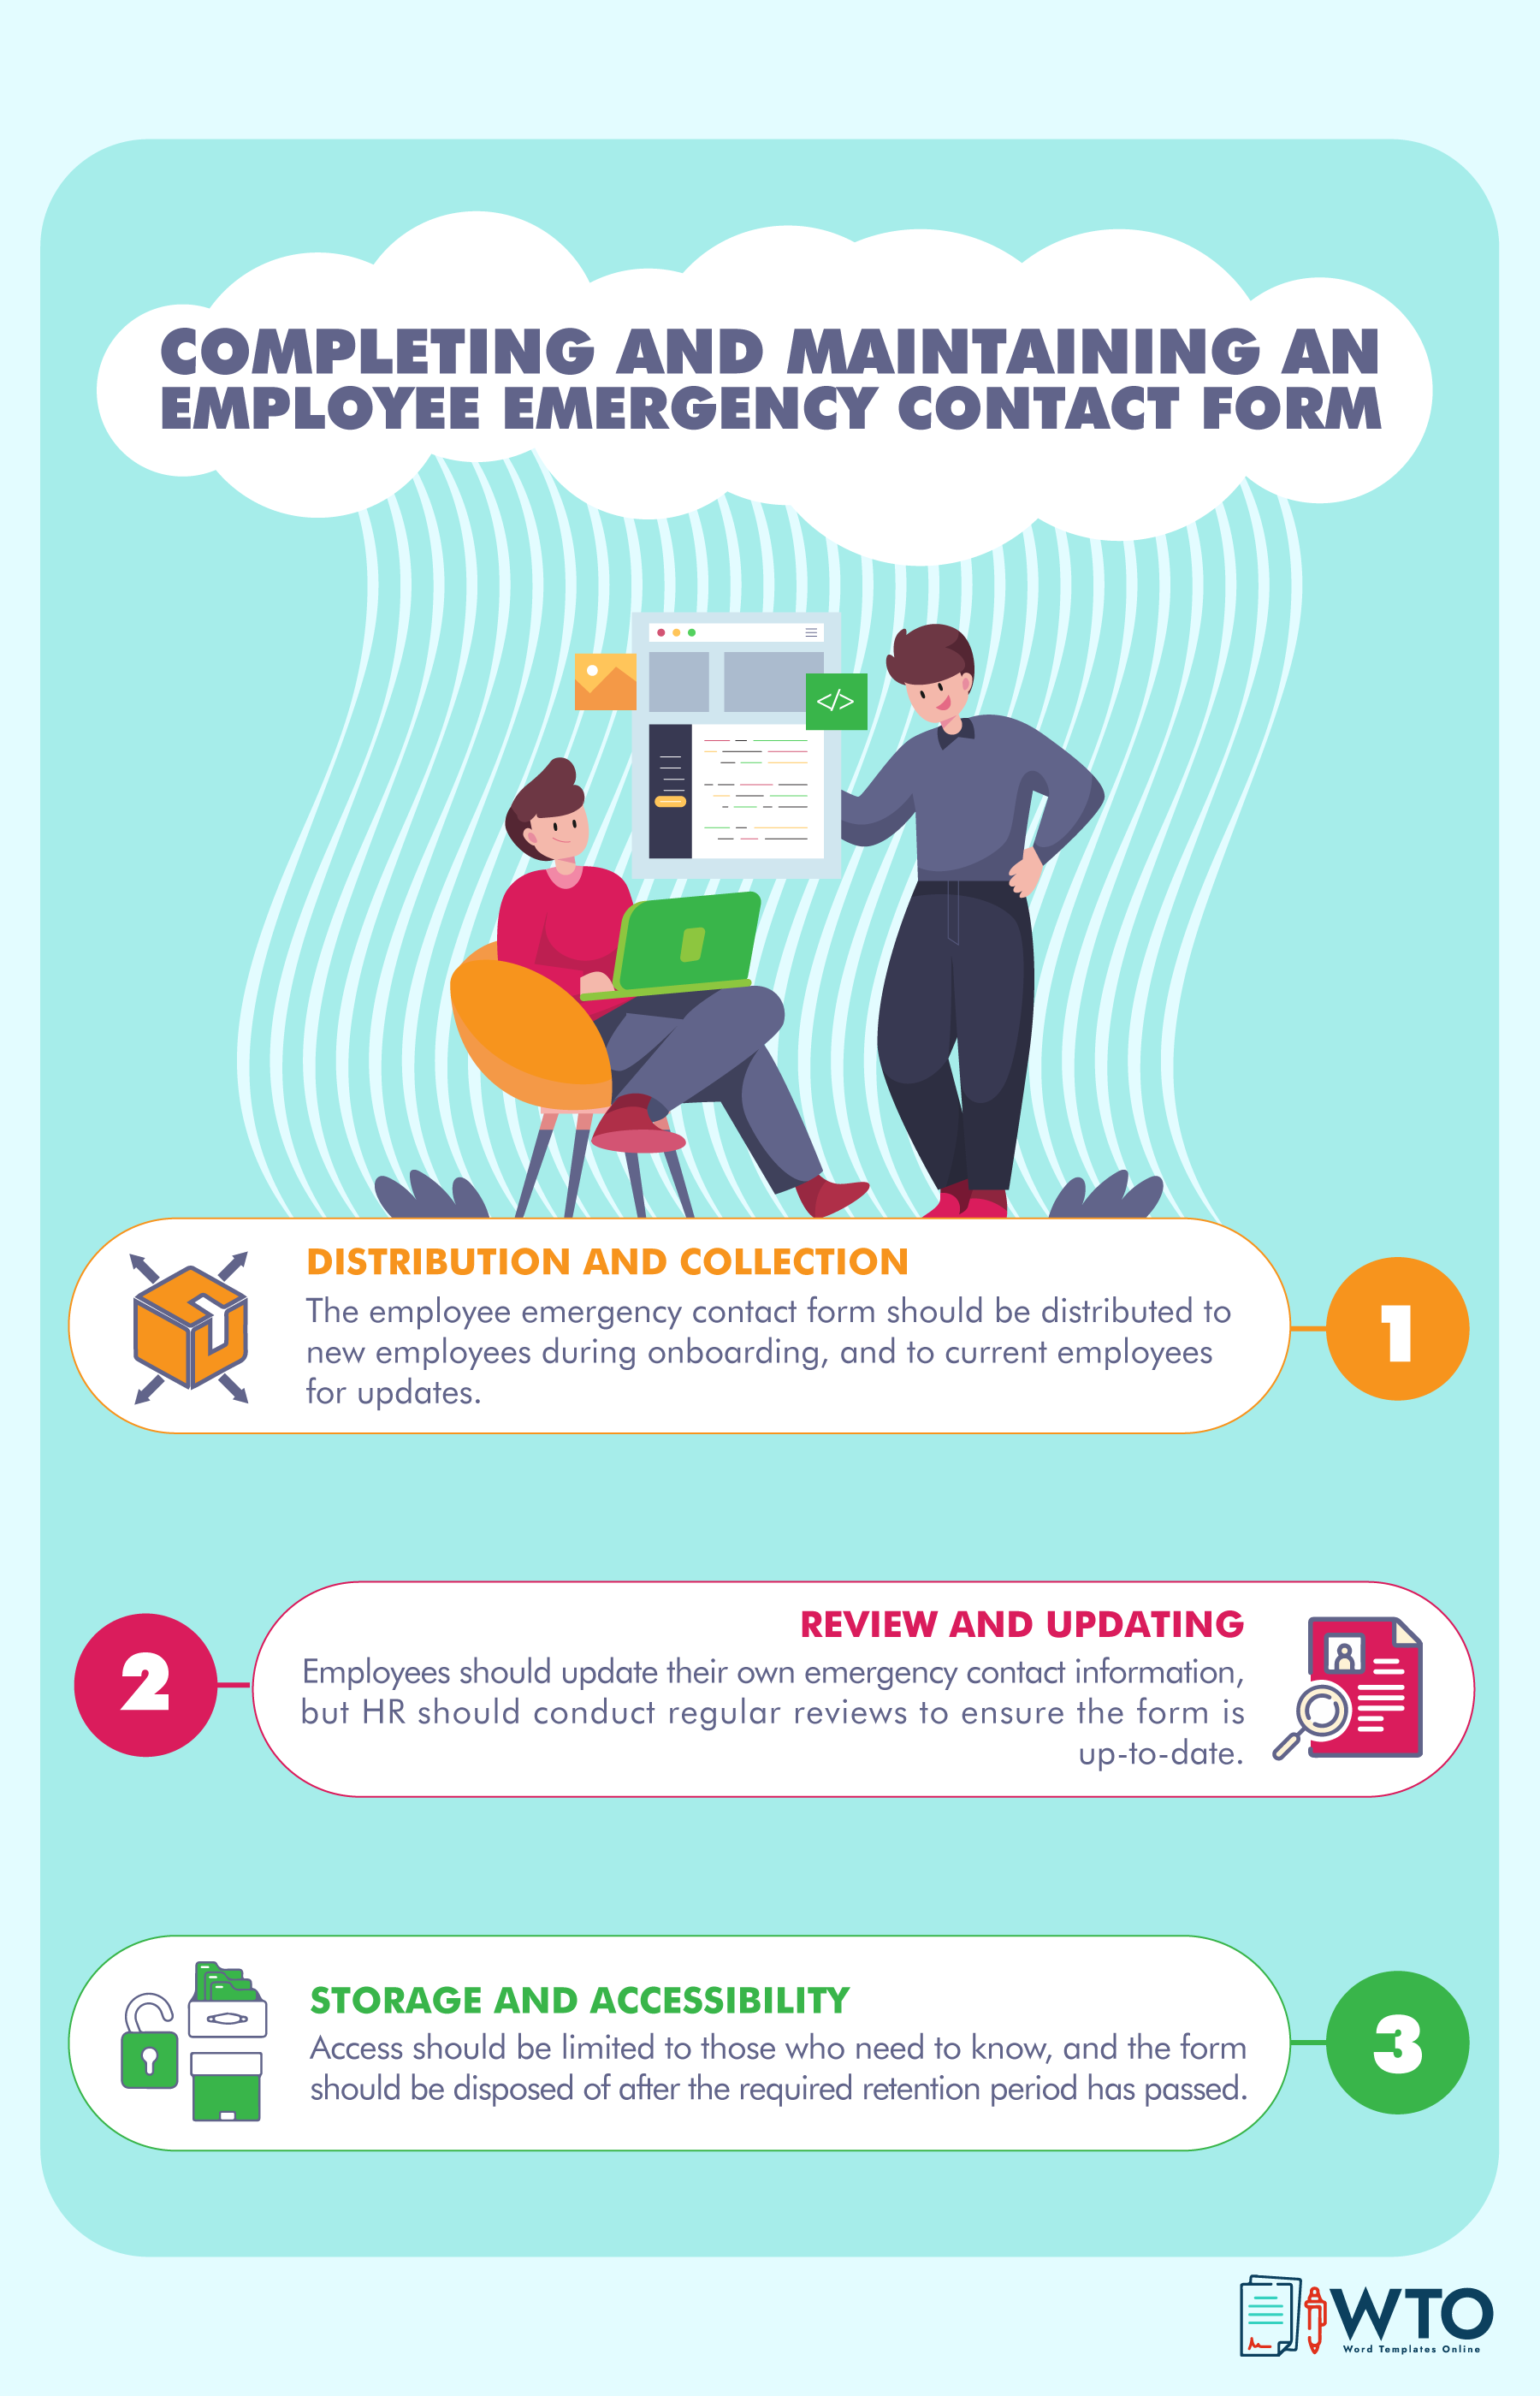 This infographic is about completing & maintaining employee contact form.